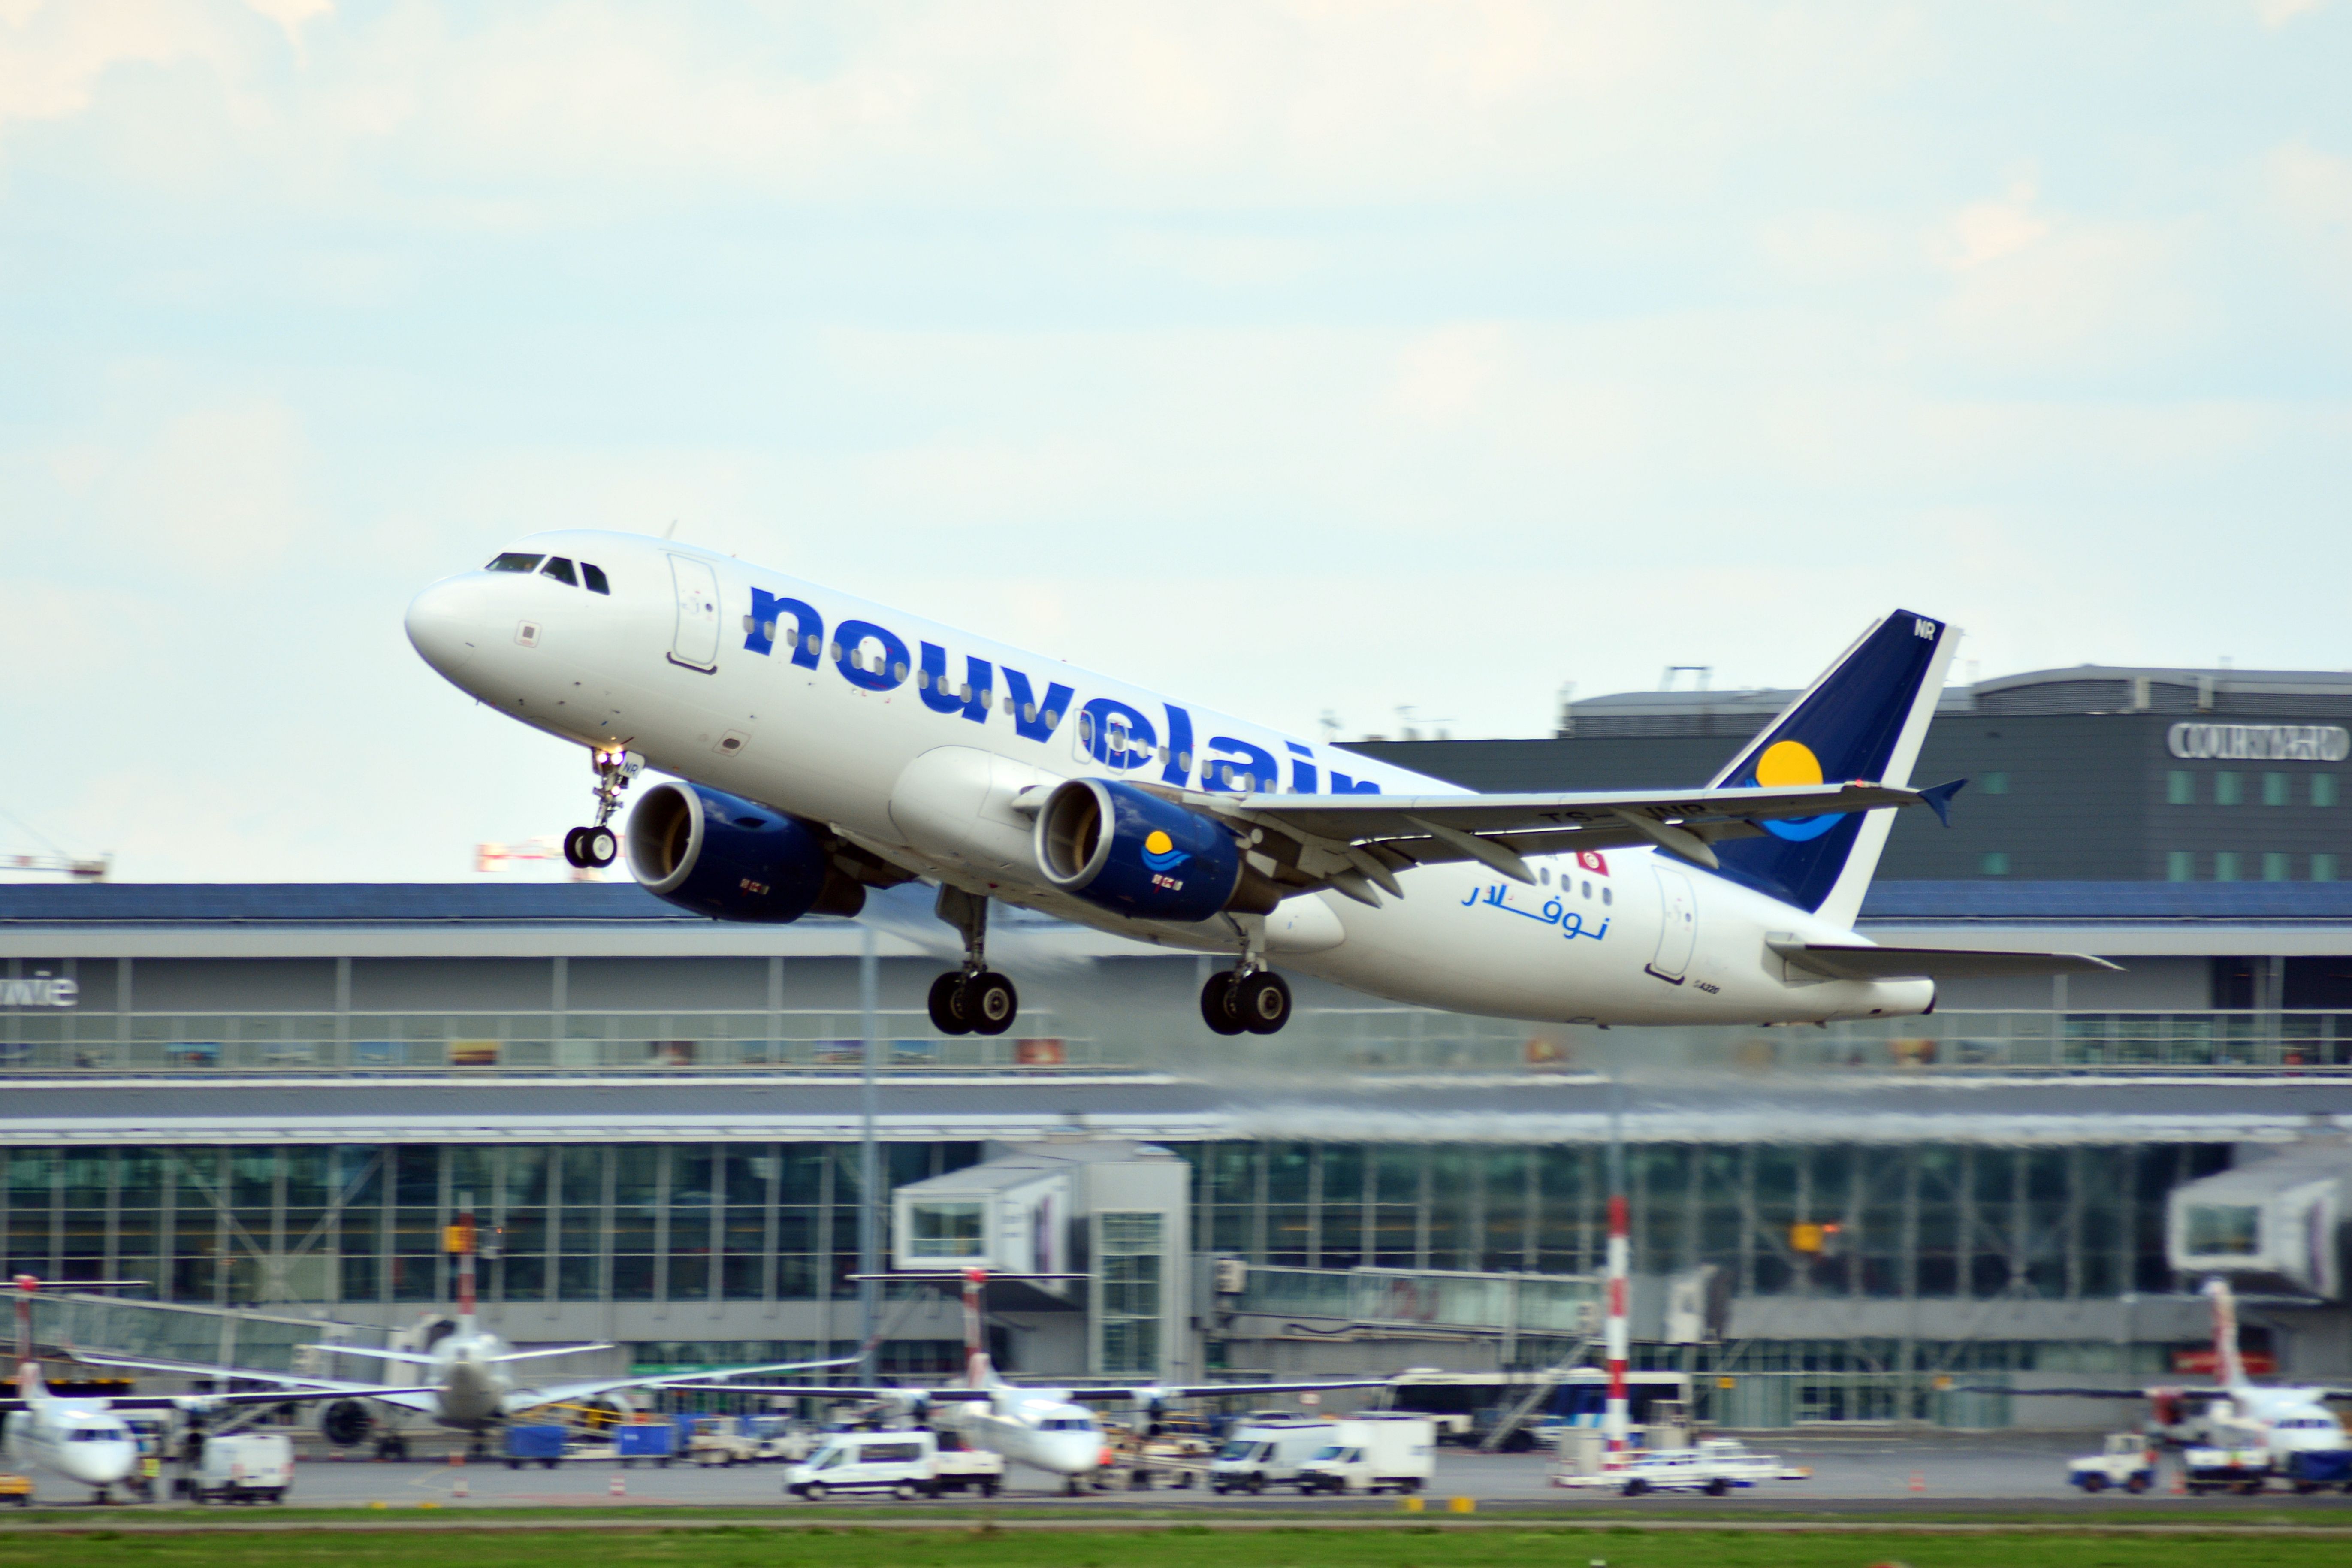 Nouvelair Airbus A320 in Warsaw